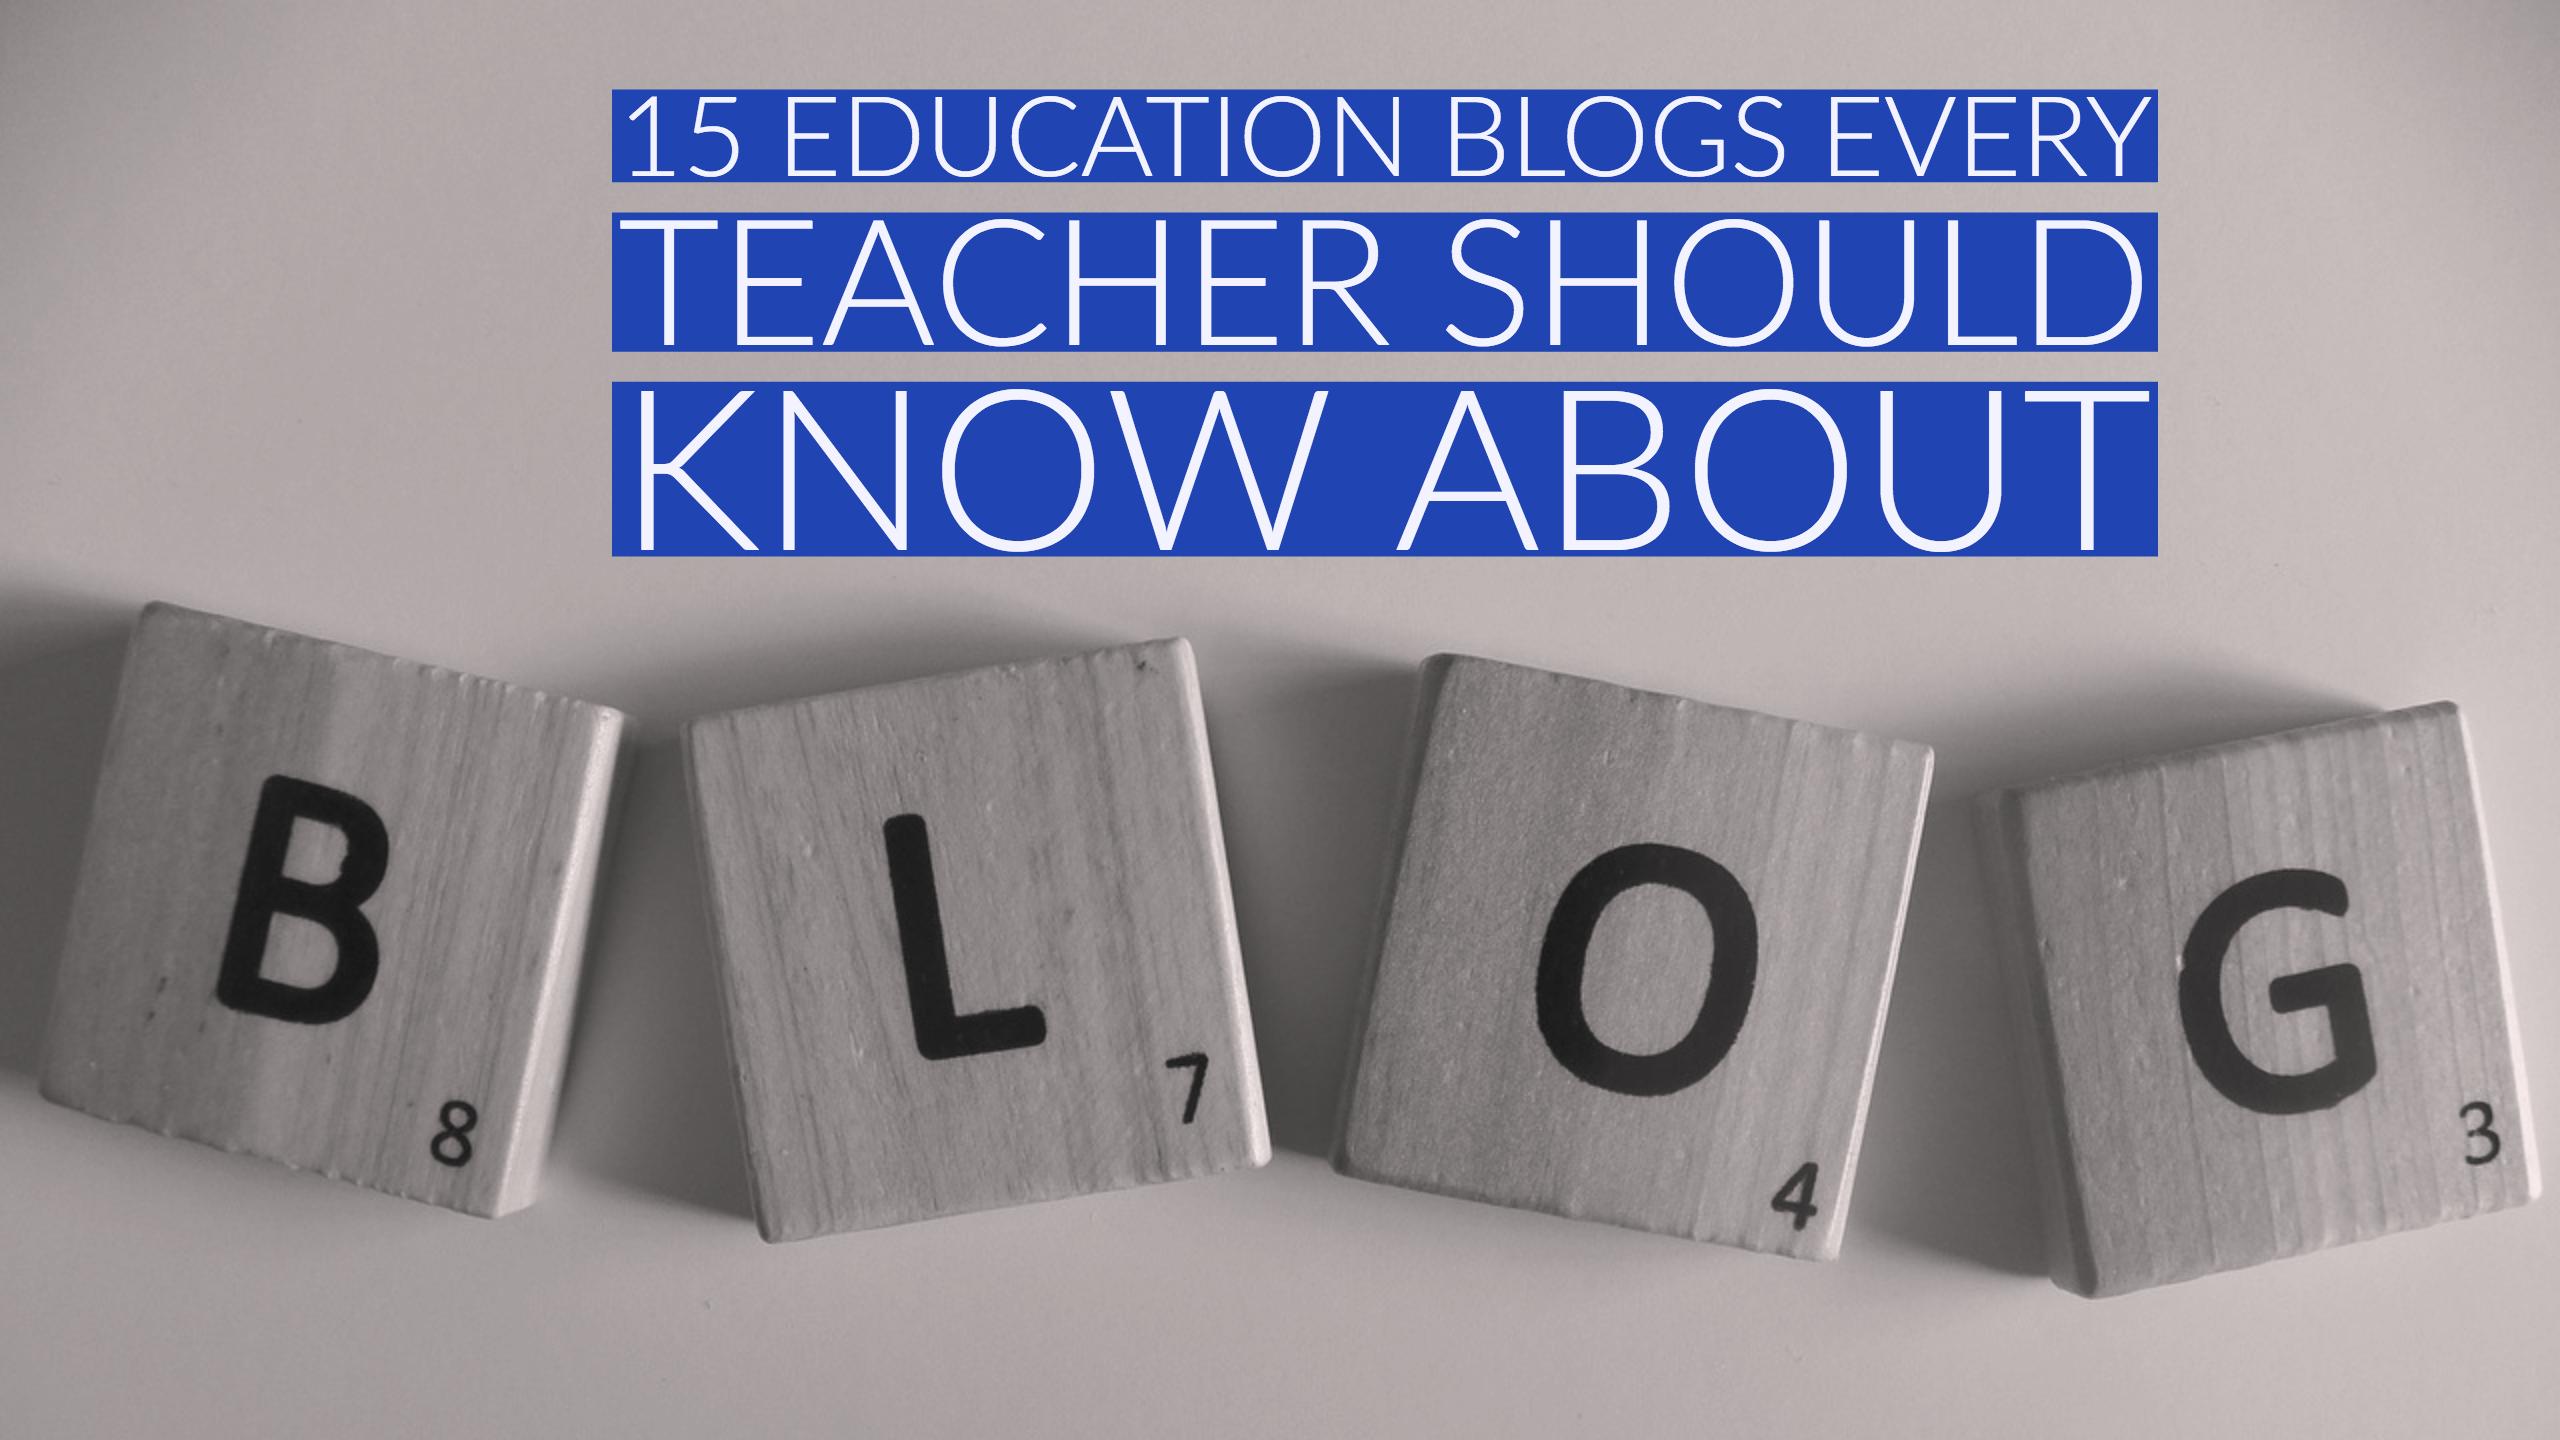 15 education blogs every teacher should know about